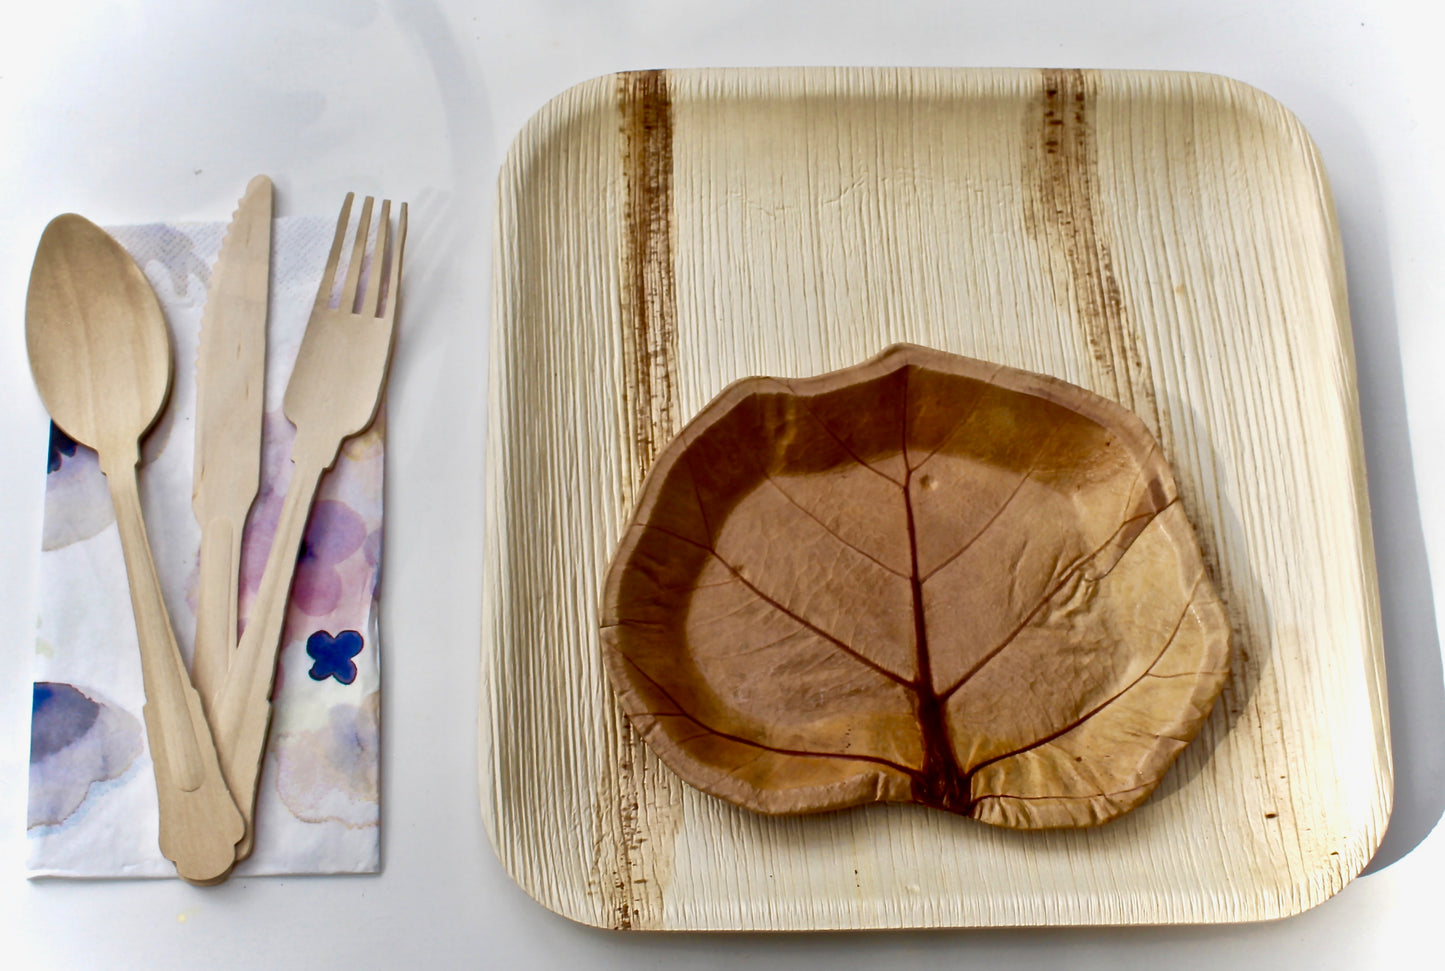 L>Bamboo Type Palm Leaf Plate 9.5 " Square 20 Pic - Sea Grape Dessert Plate 20 Pic and 60" Utensils - 20 Pic Napkin  disposable